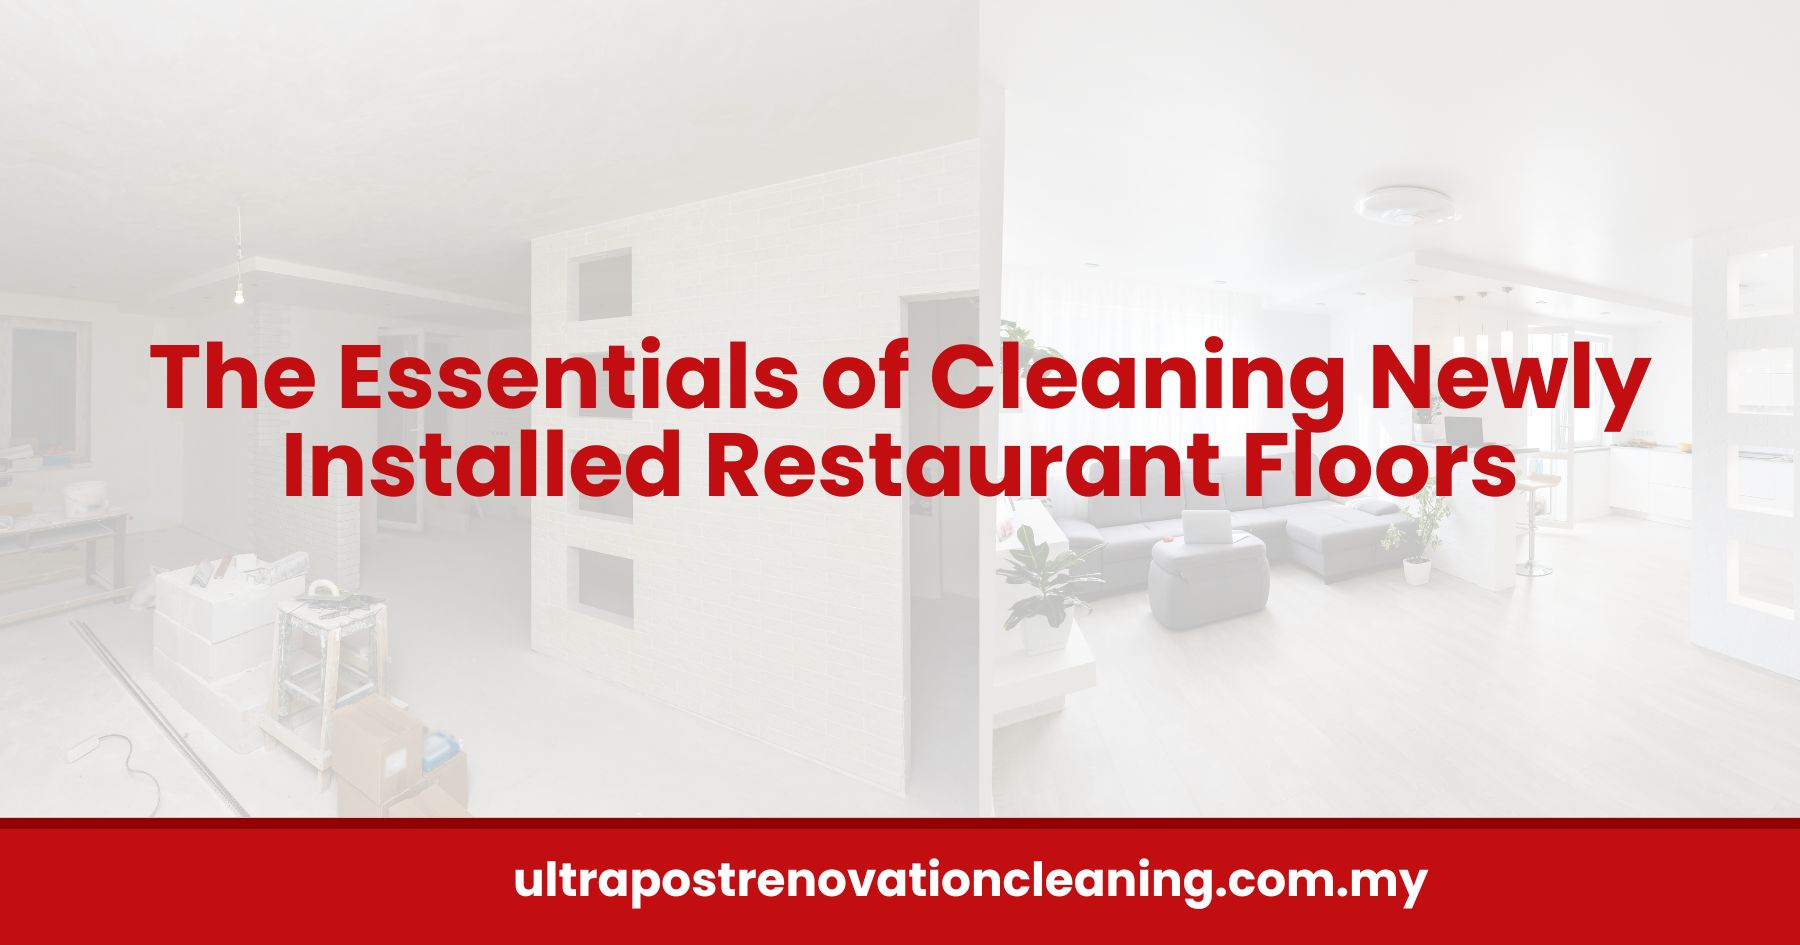 The Essentials of Cleaning Newly Installed Restaurant Floors